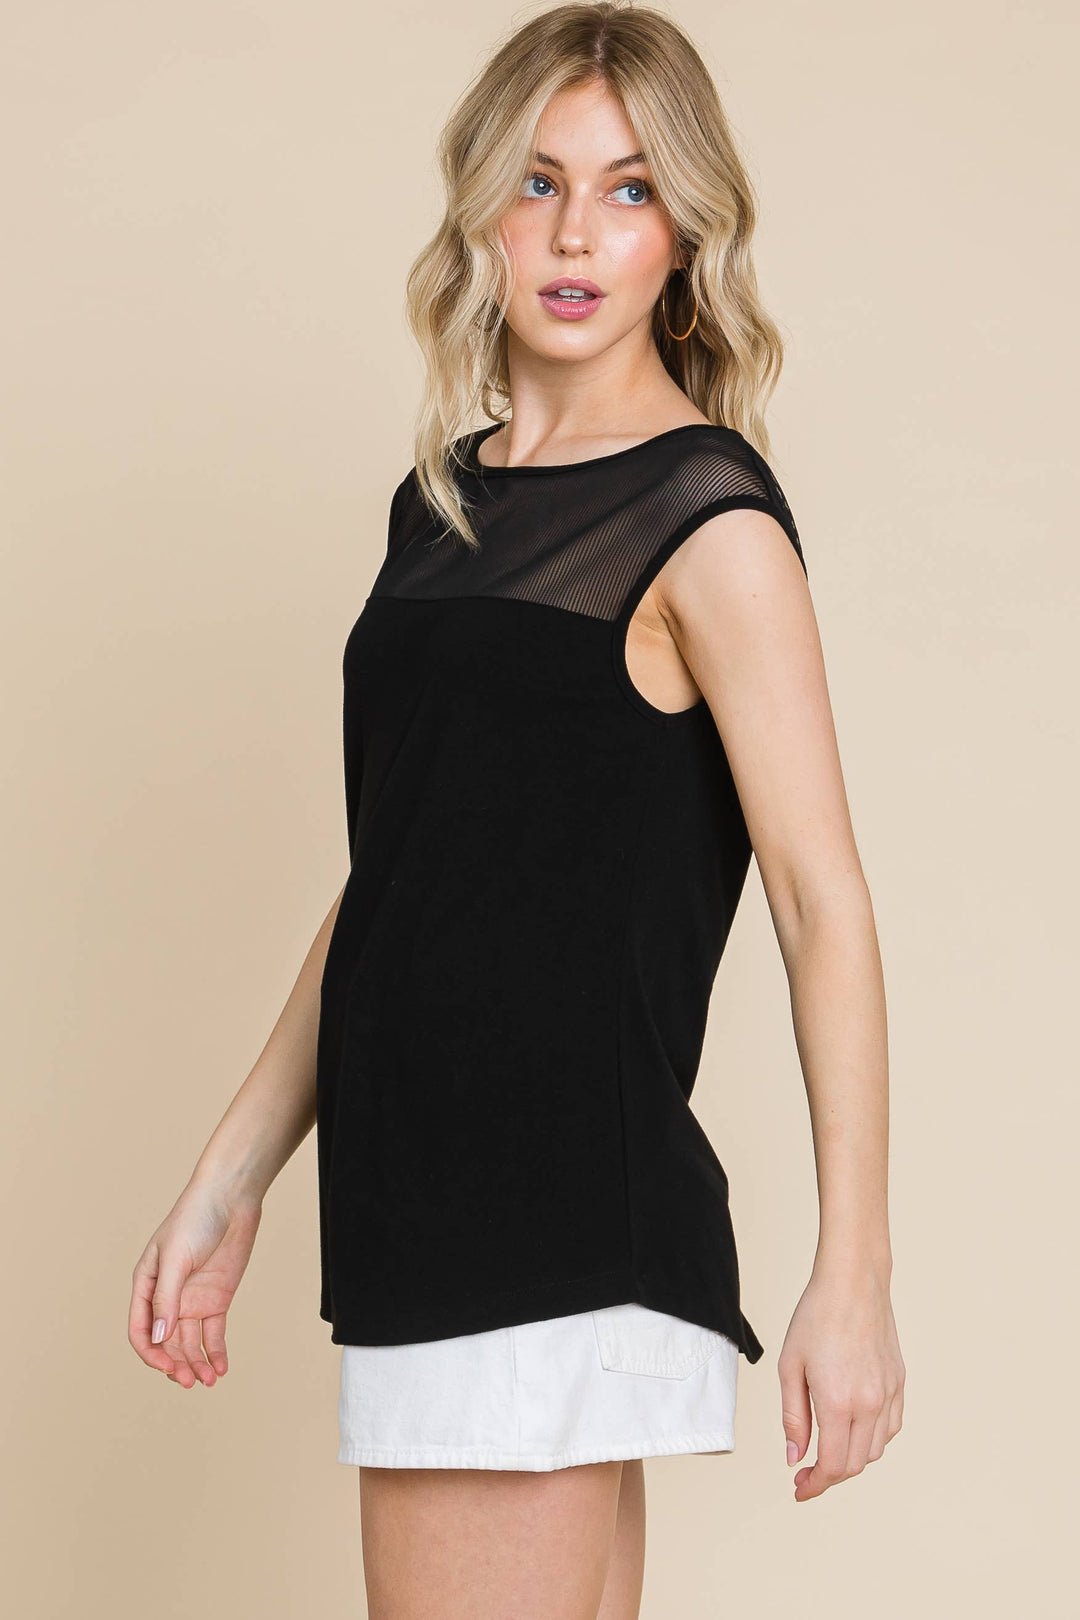 Tonara Boat Neck Mesh Contrast Tank-Tank Tops-Inspired by Justeen-Women's Clothing Boutique in Chicago, Illinois